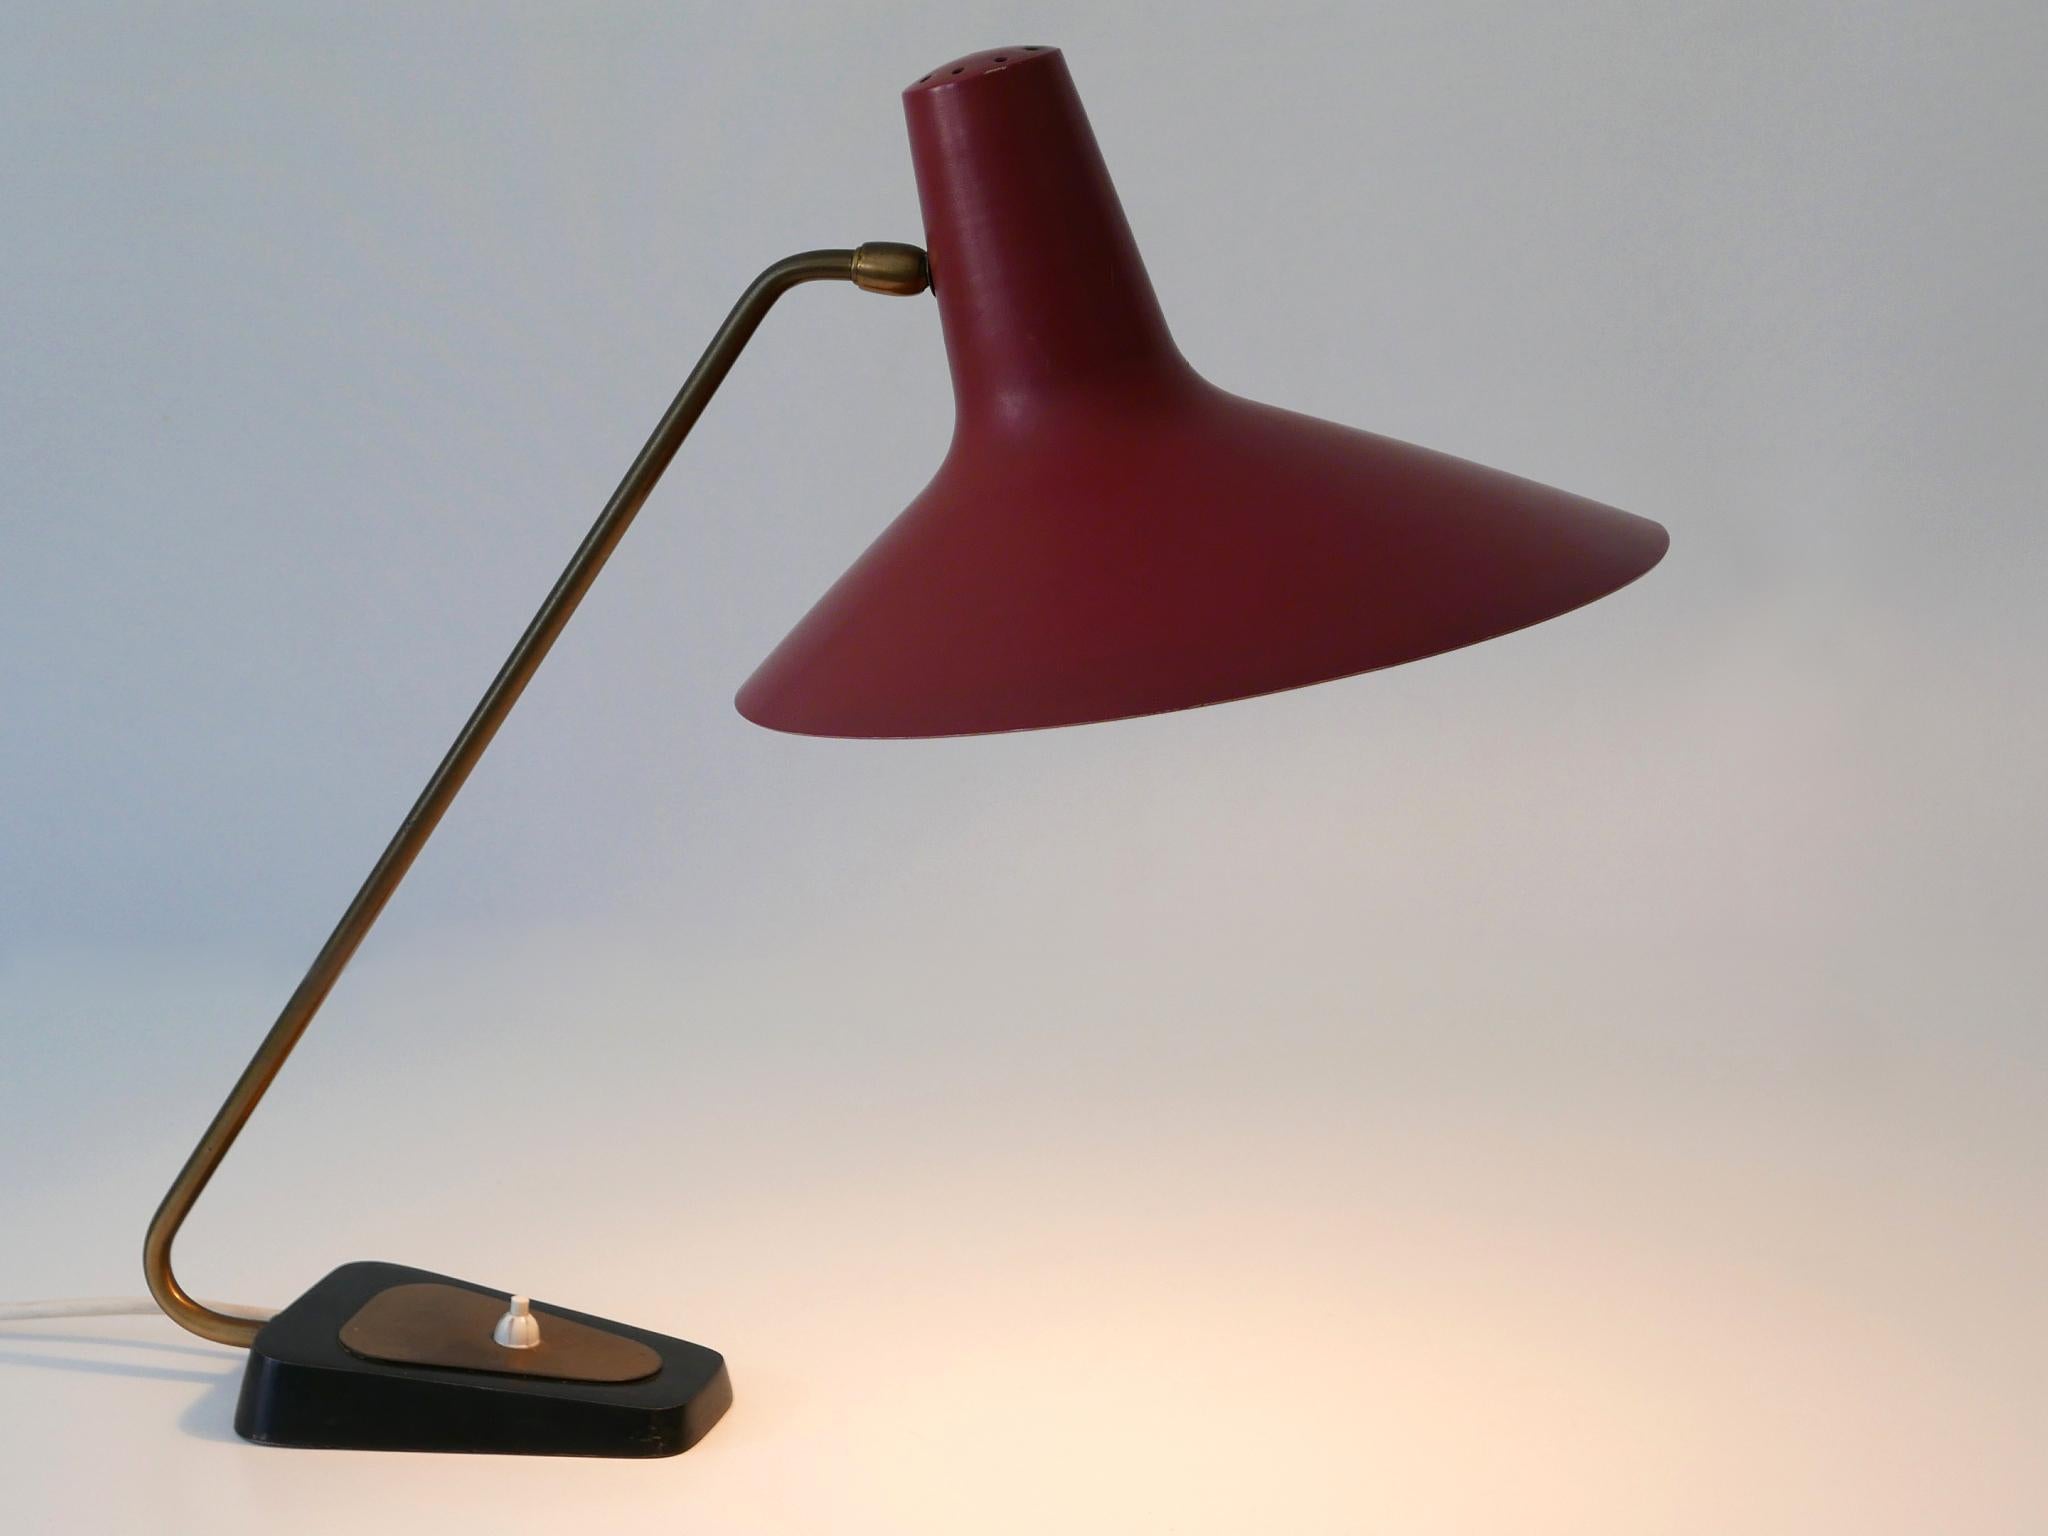 Extremely rare, elegant and adjustable Mid-Century Modern table lamp or desk light. The large lamp shade adjustable in various postion . Manufactured by Gebrüder Cosack, Neheim-Hüsten, Germany, 1950s.

Executed in Bordeaux color enameled